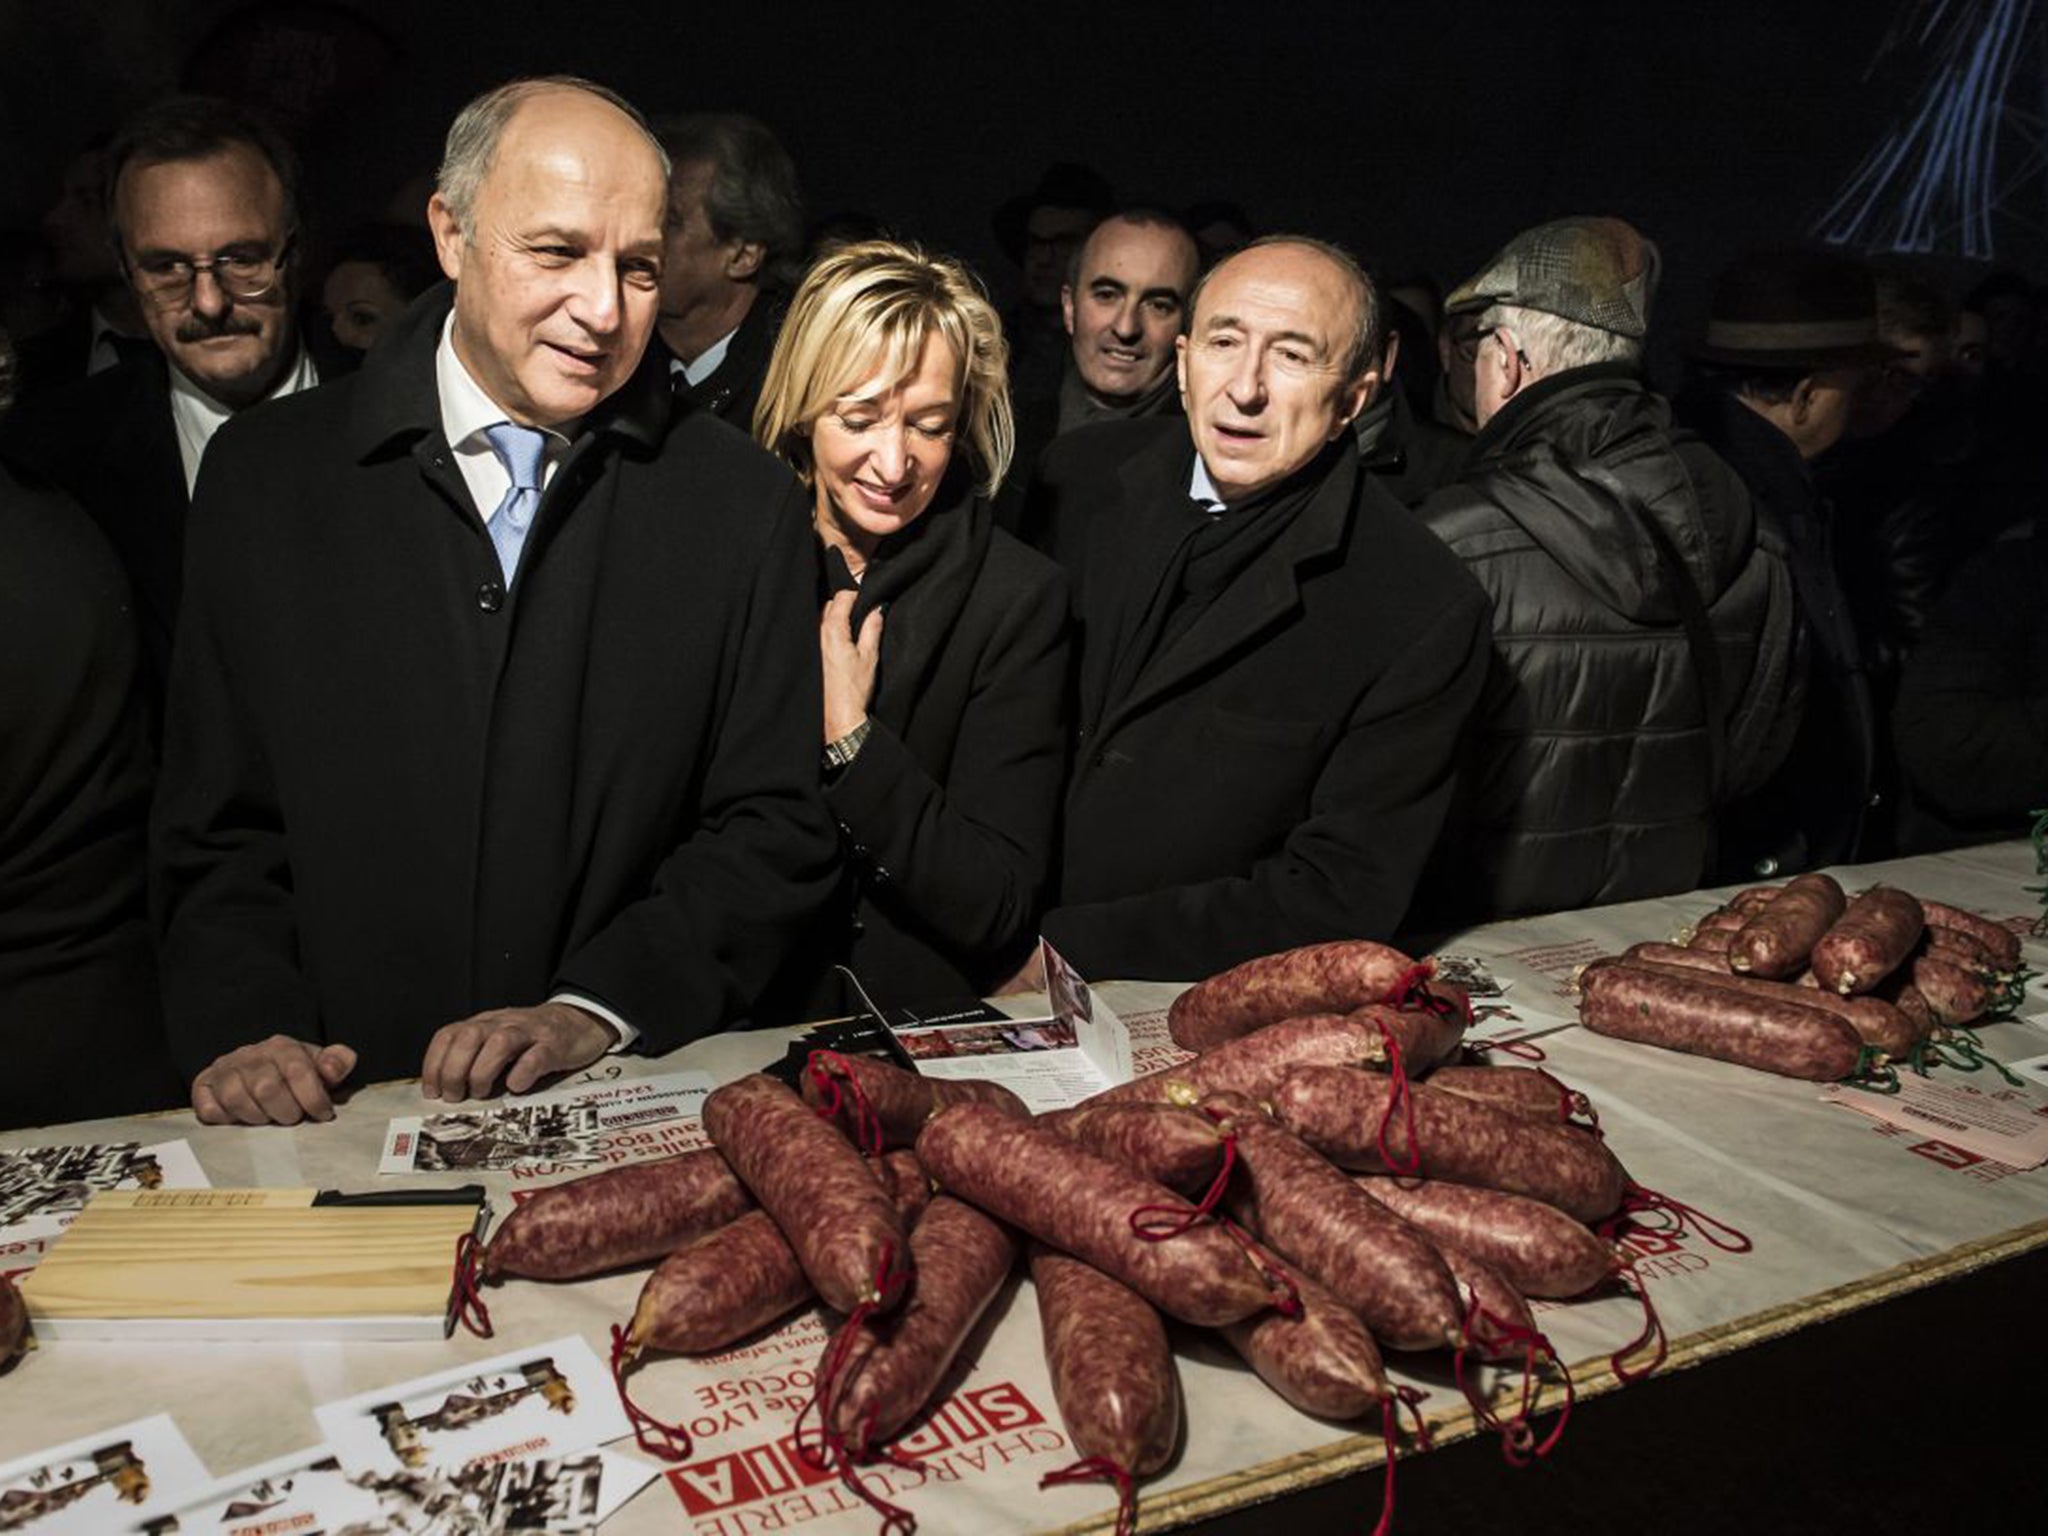 Man of taste: French Foreign Minister Laurent Fabius (second left) is a noted bon viveur